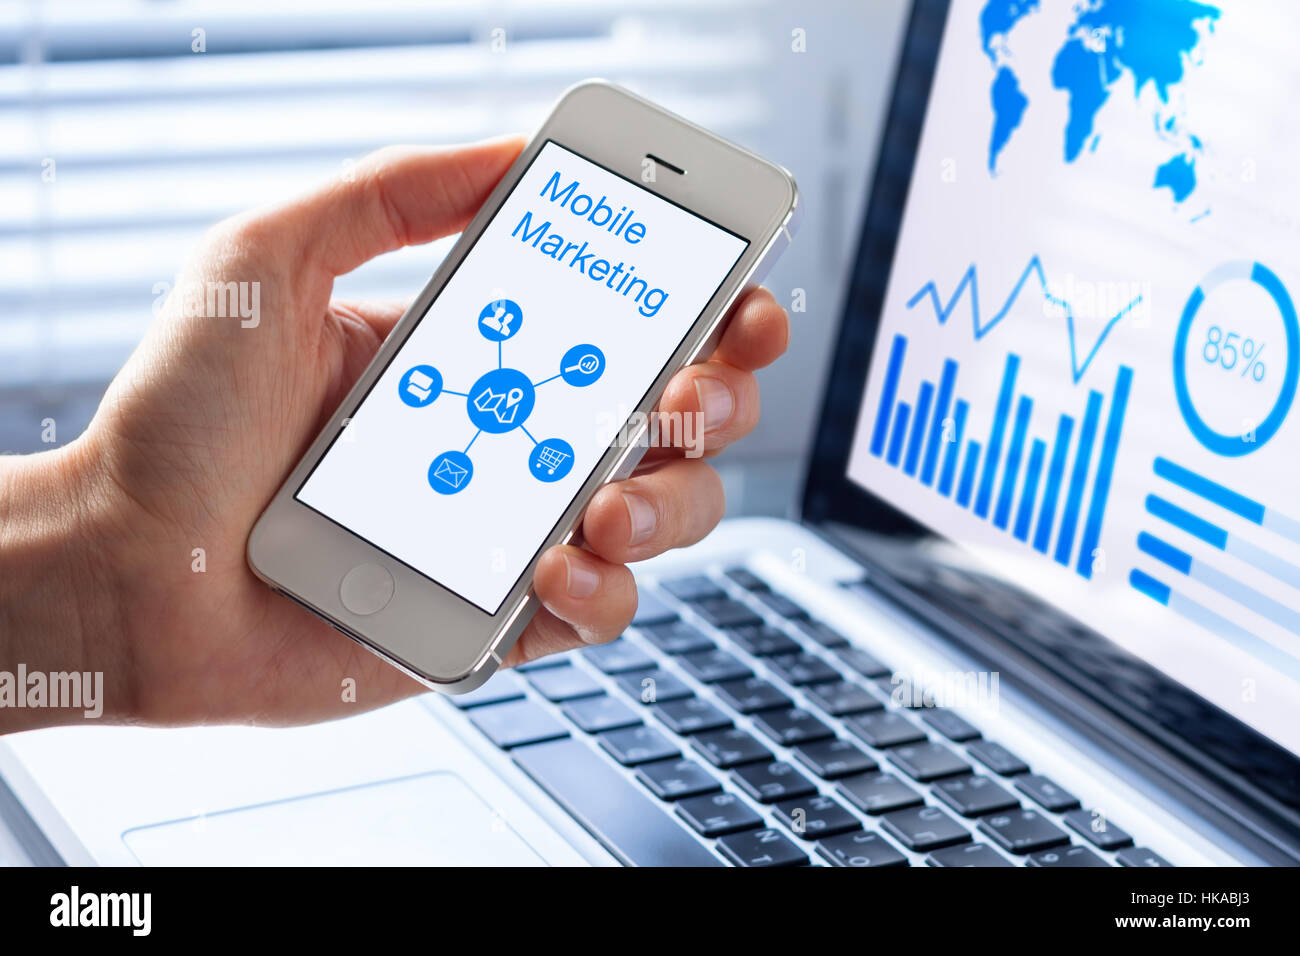 Mobile marketing and customer data analytics concept with a person showing a smartphone screen and a computer Stock Photo